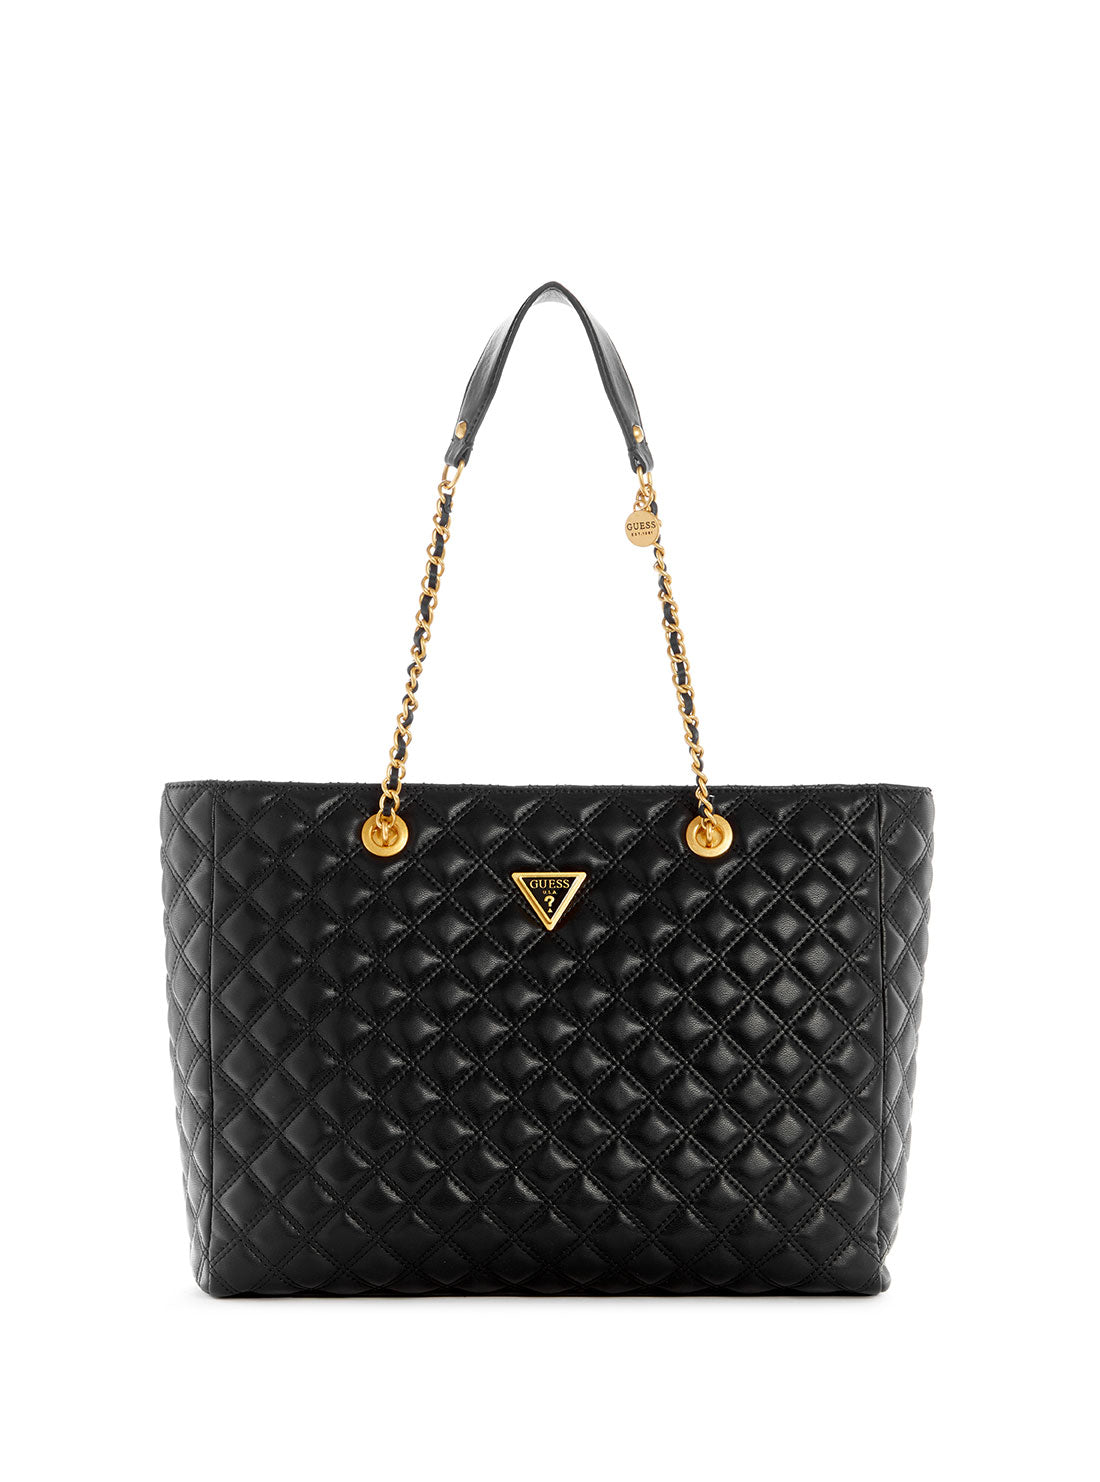 GUESS Women's Black Giully Quilted Tote Bag QA874823 Front View